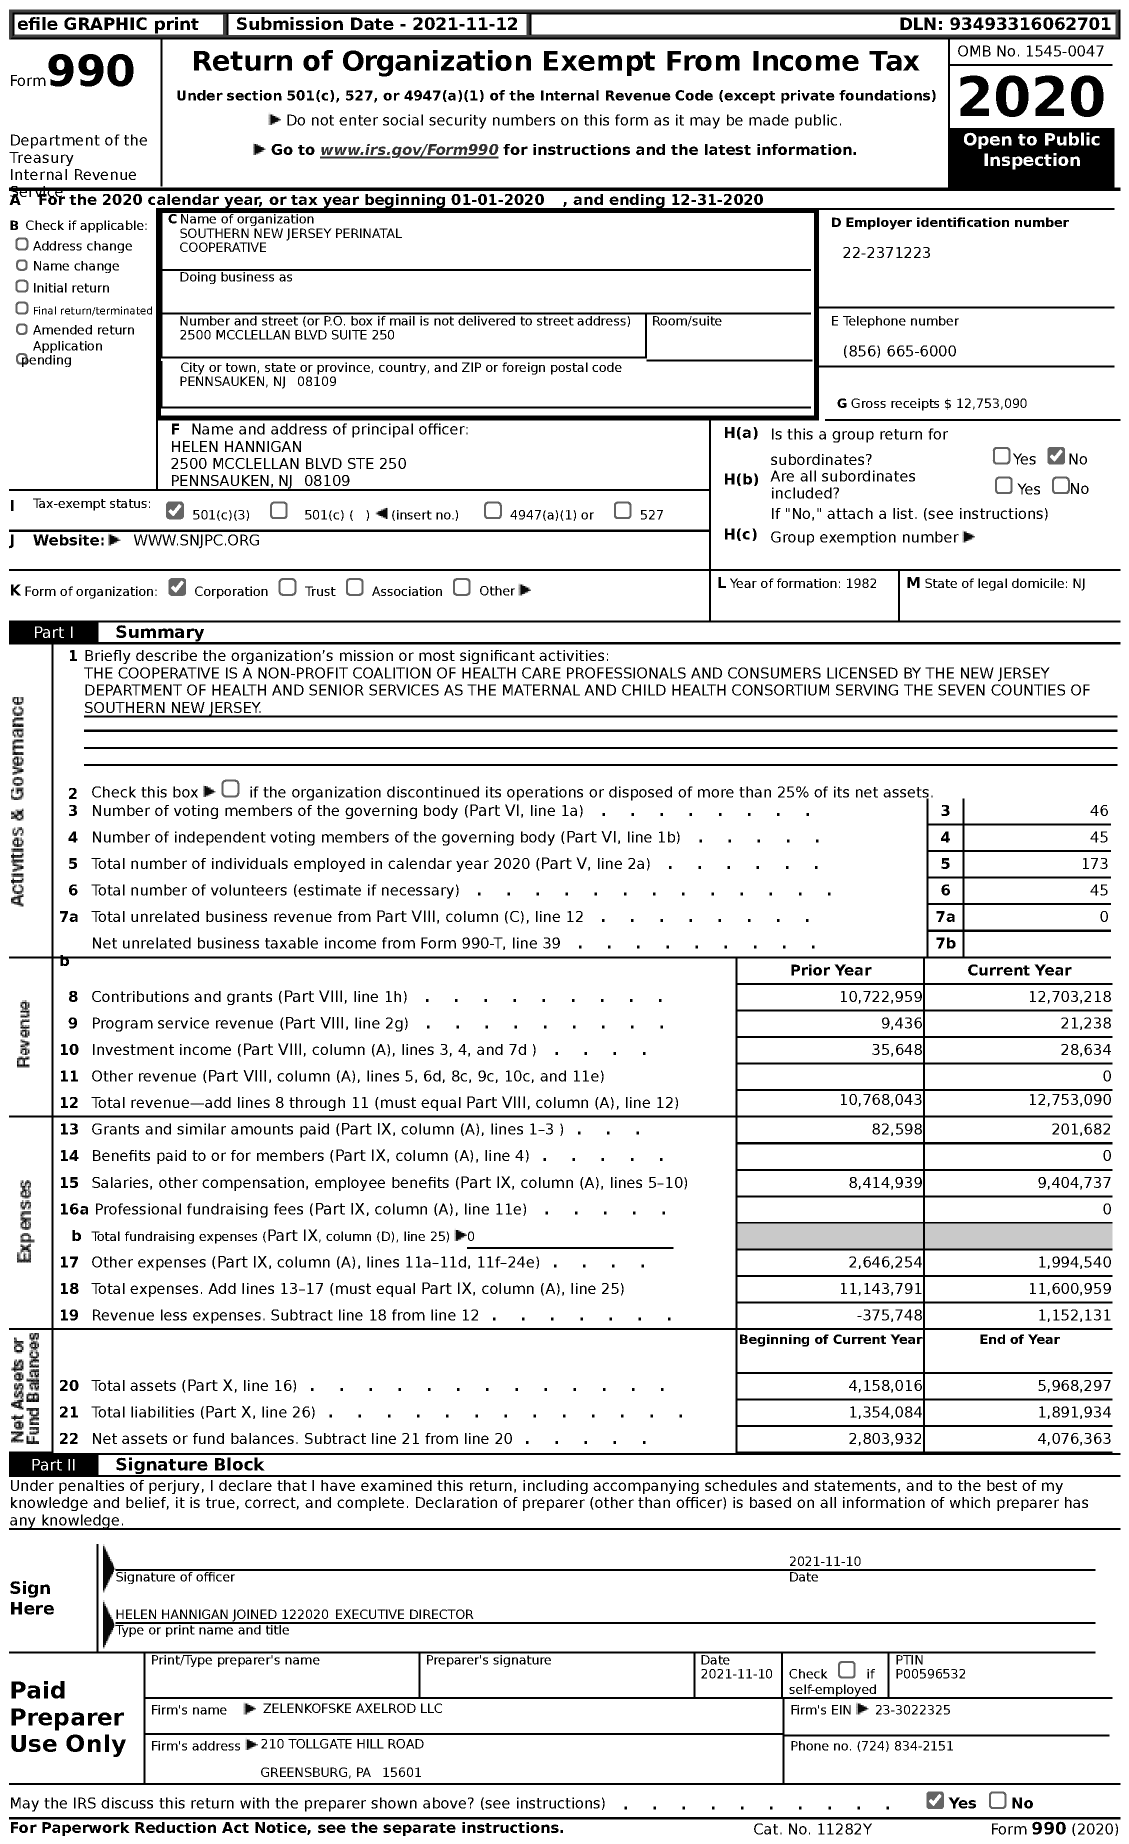 Image of first page of 2020 Form 990 for Southern New Jersey Perinatal Cooperative (SNJPC)